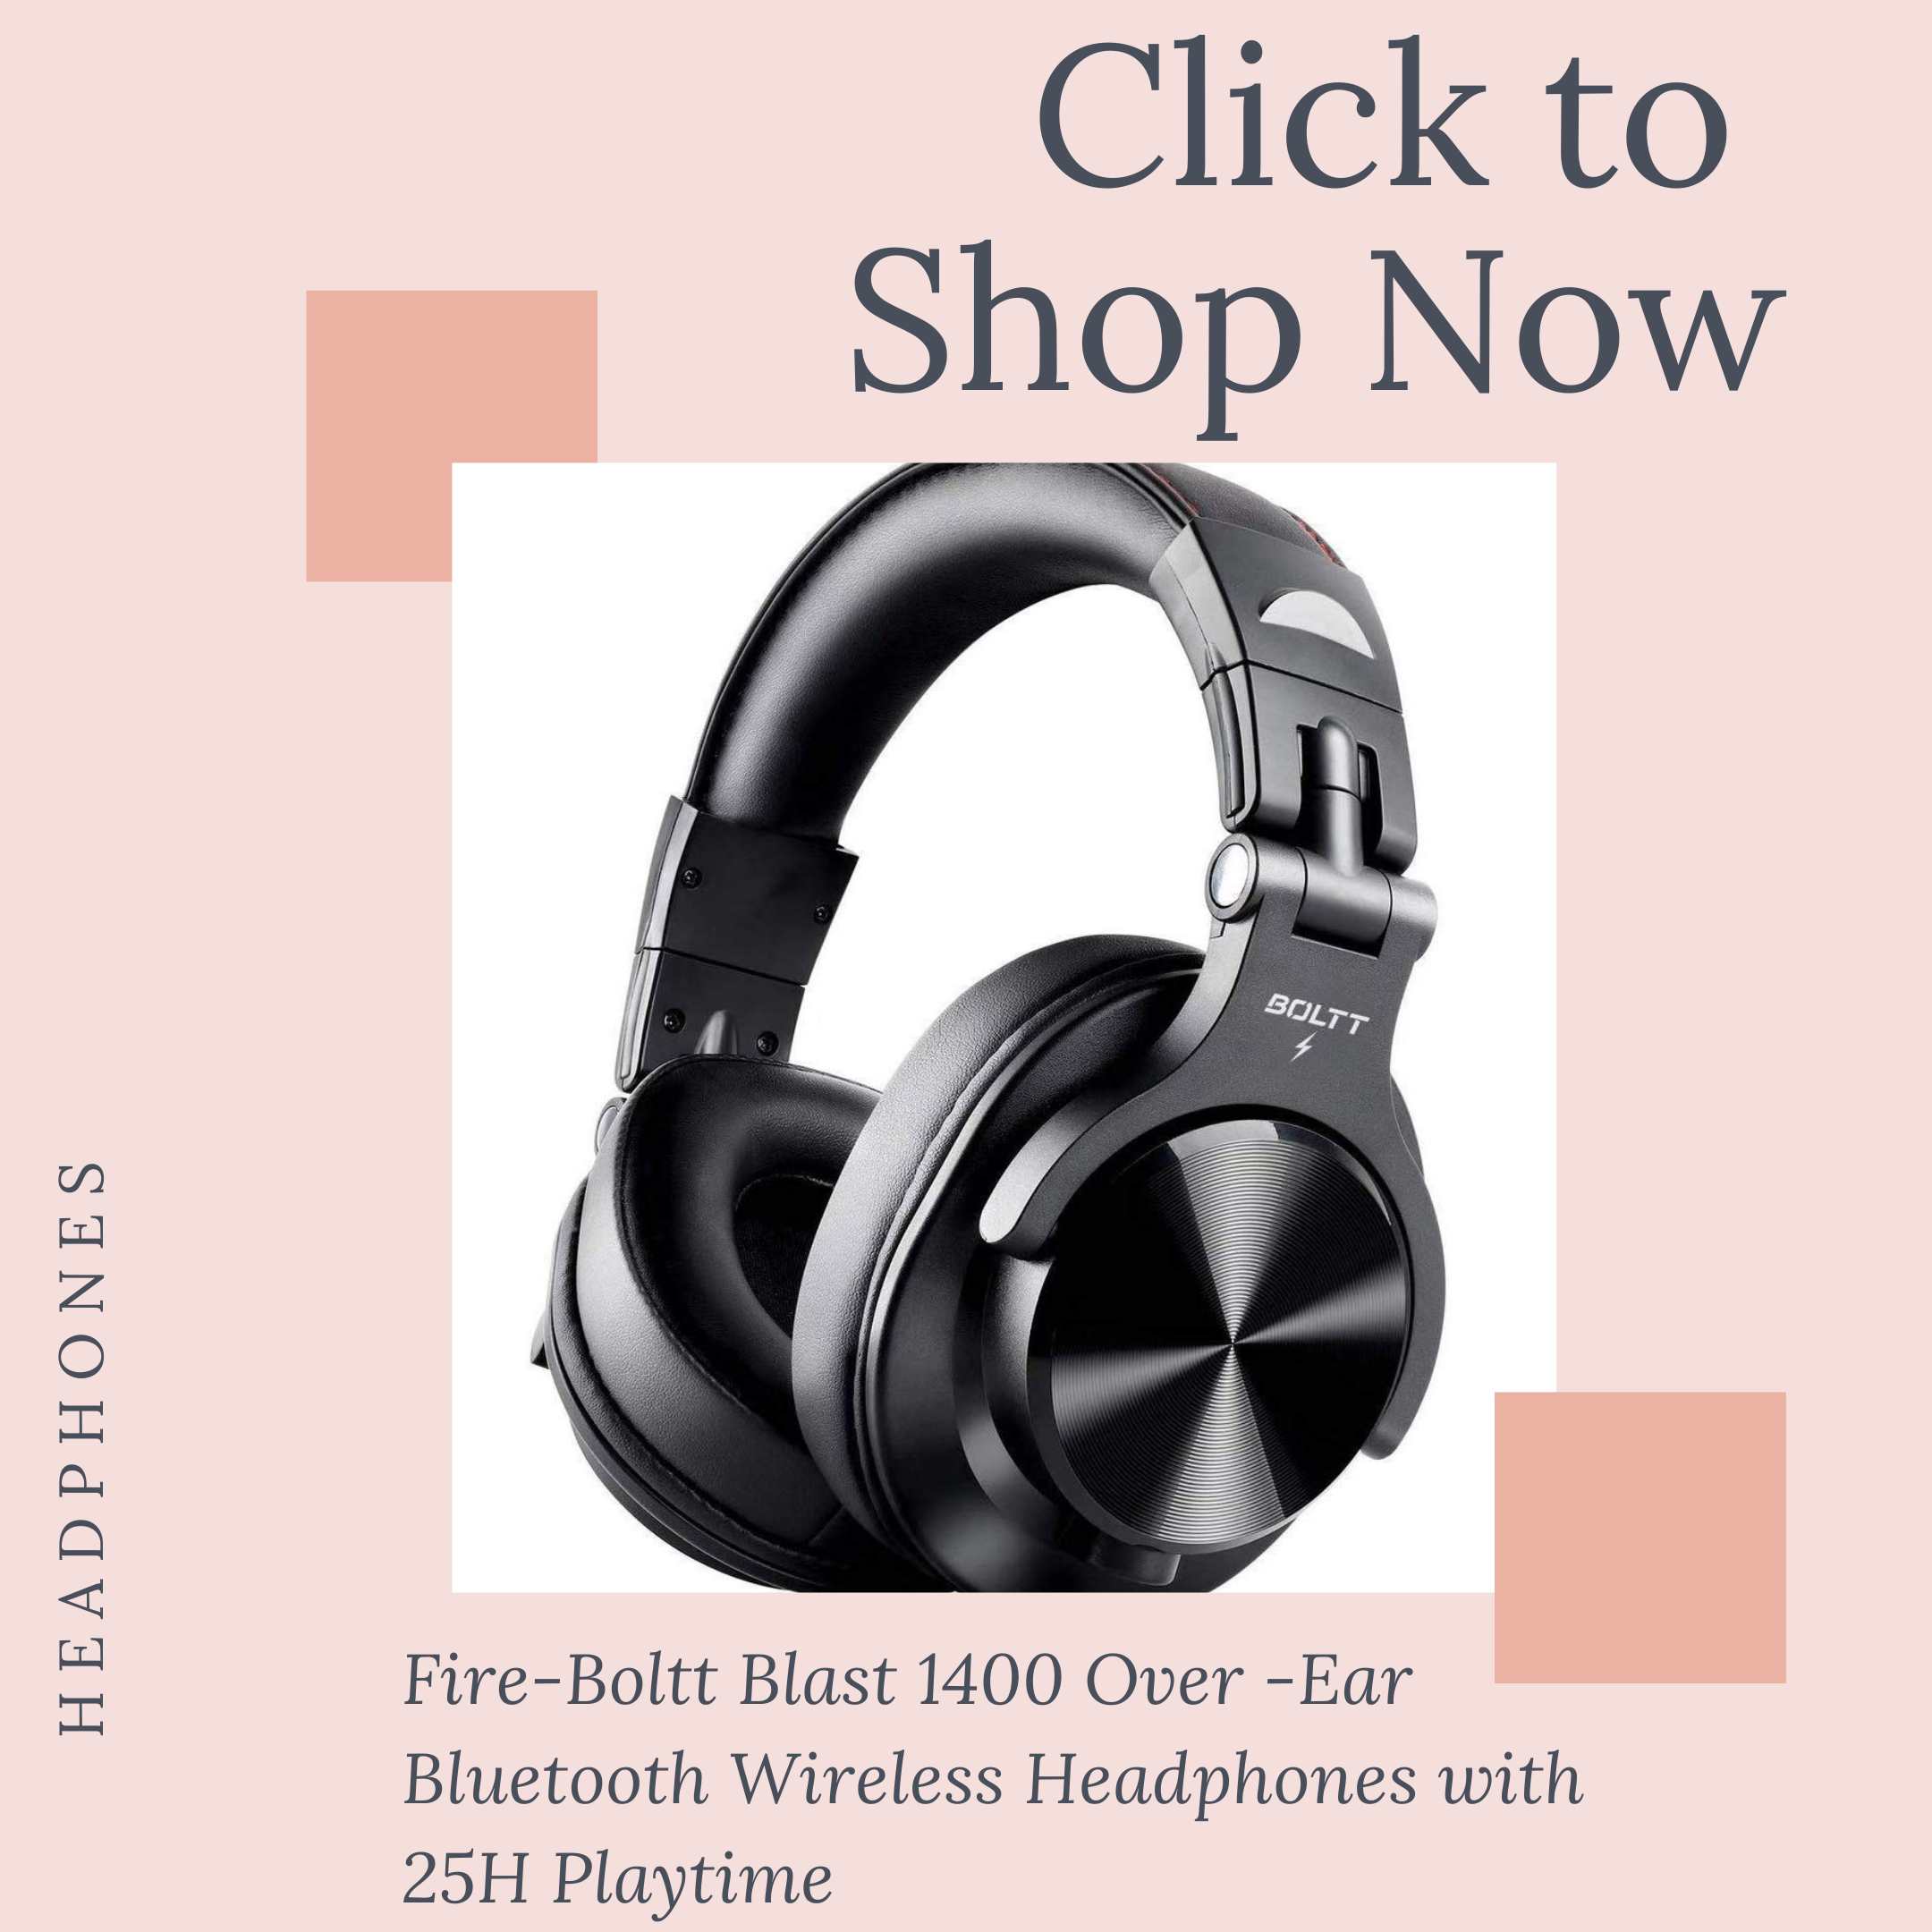 Boltt Blast 1400 Over -Ear Bluetooth Wireless Headphones with 25H Playtime